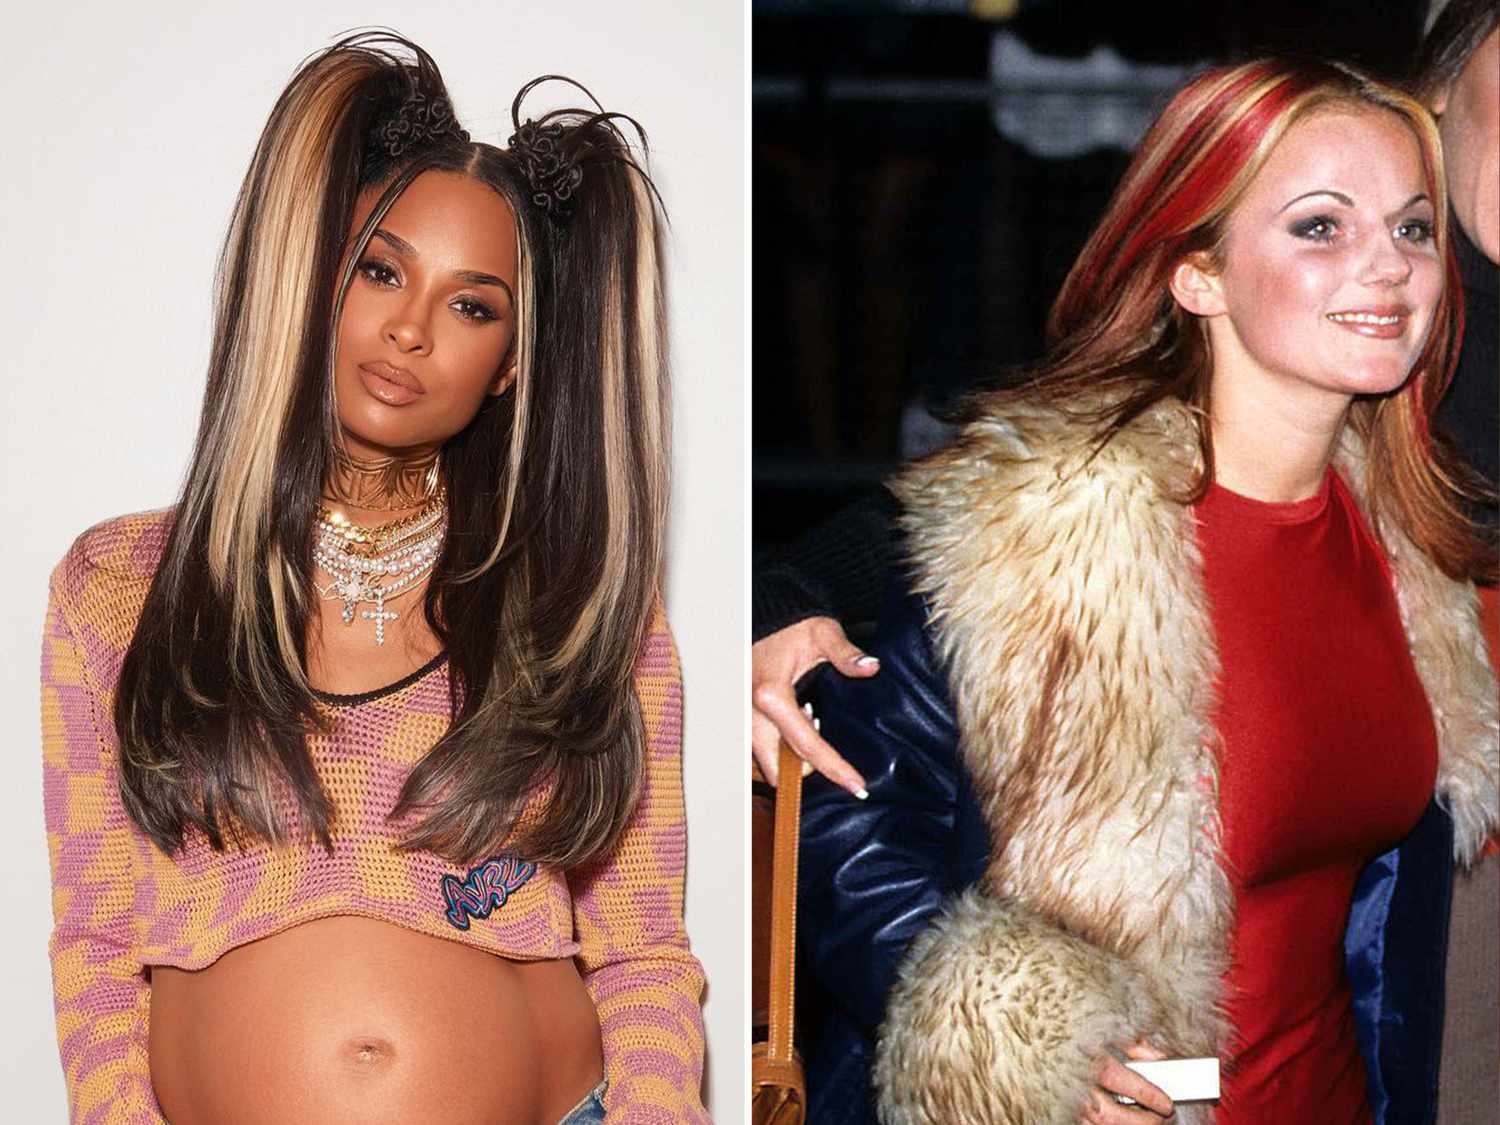 Side by side photos of Ciara and ginger spice of the spice girls